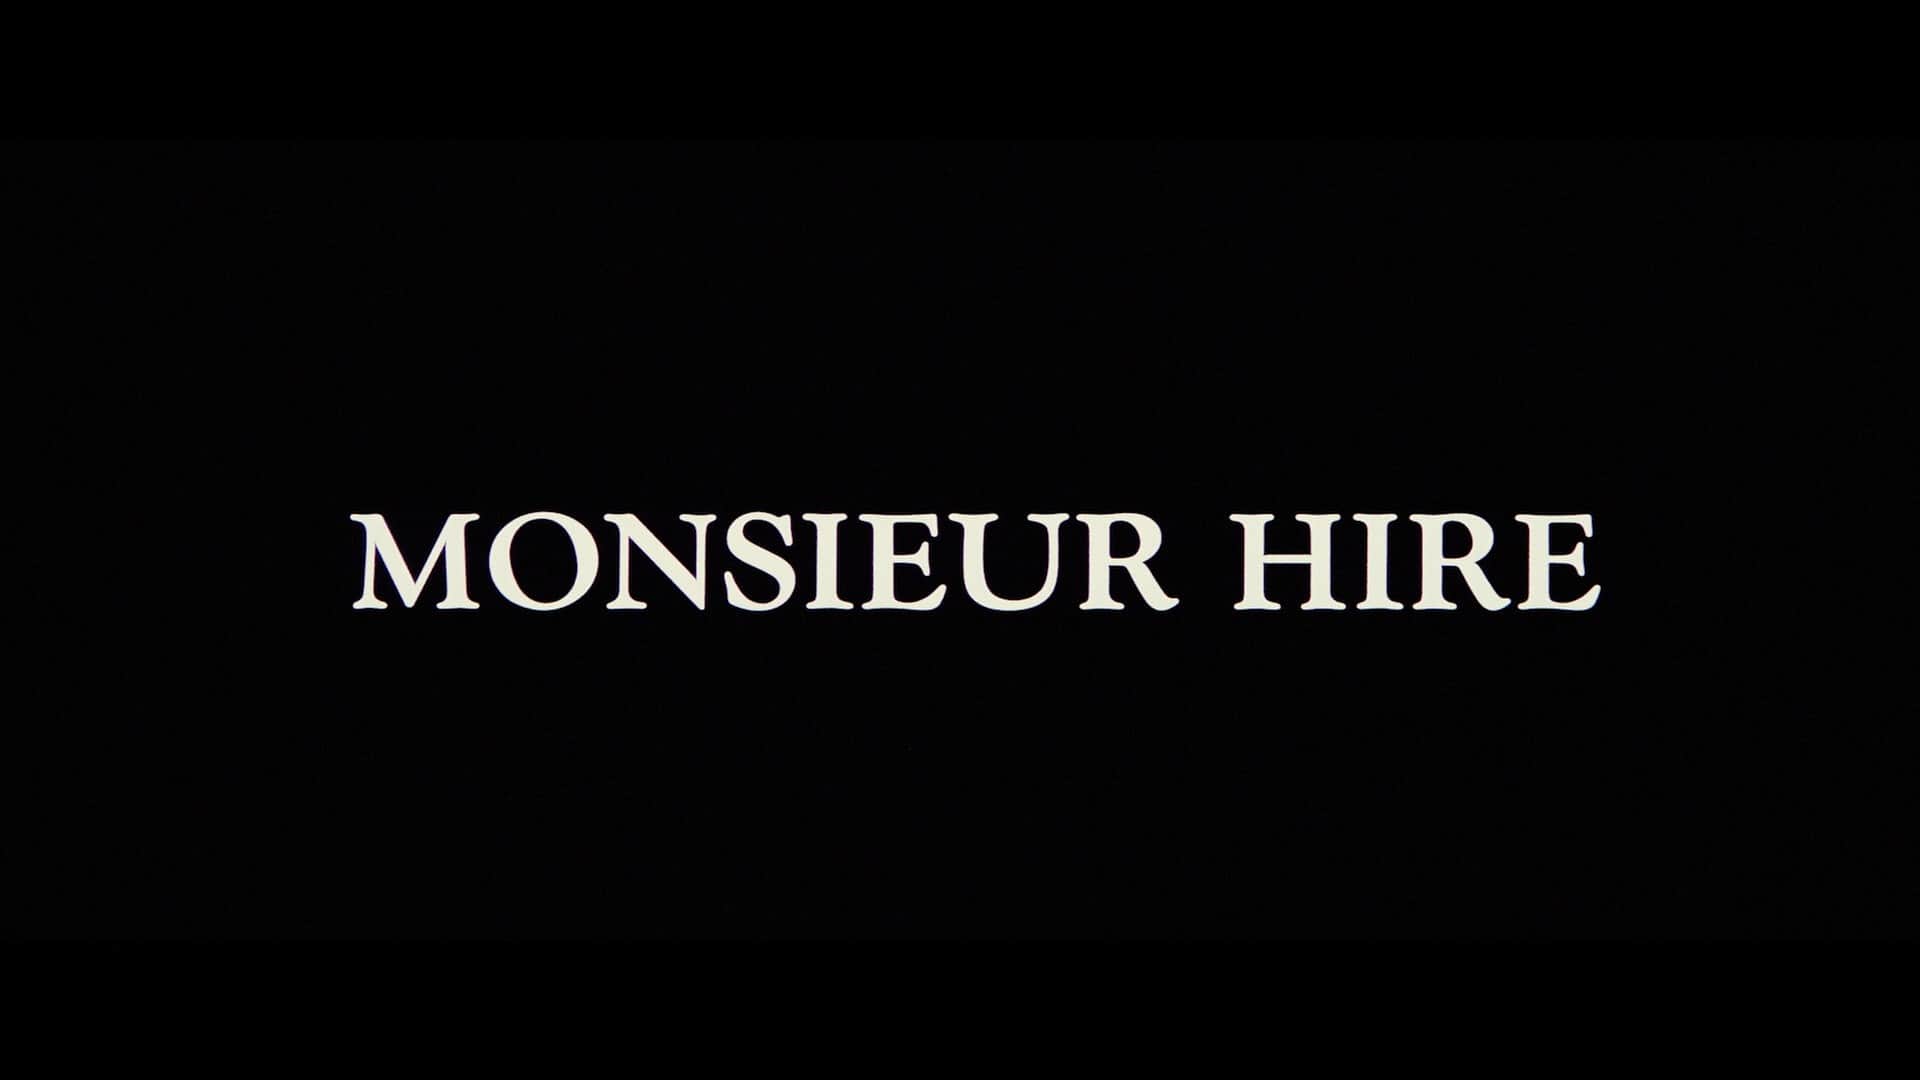 Monsieur Hire (1989) [Cohen Collection Blu-ray review] 24